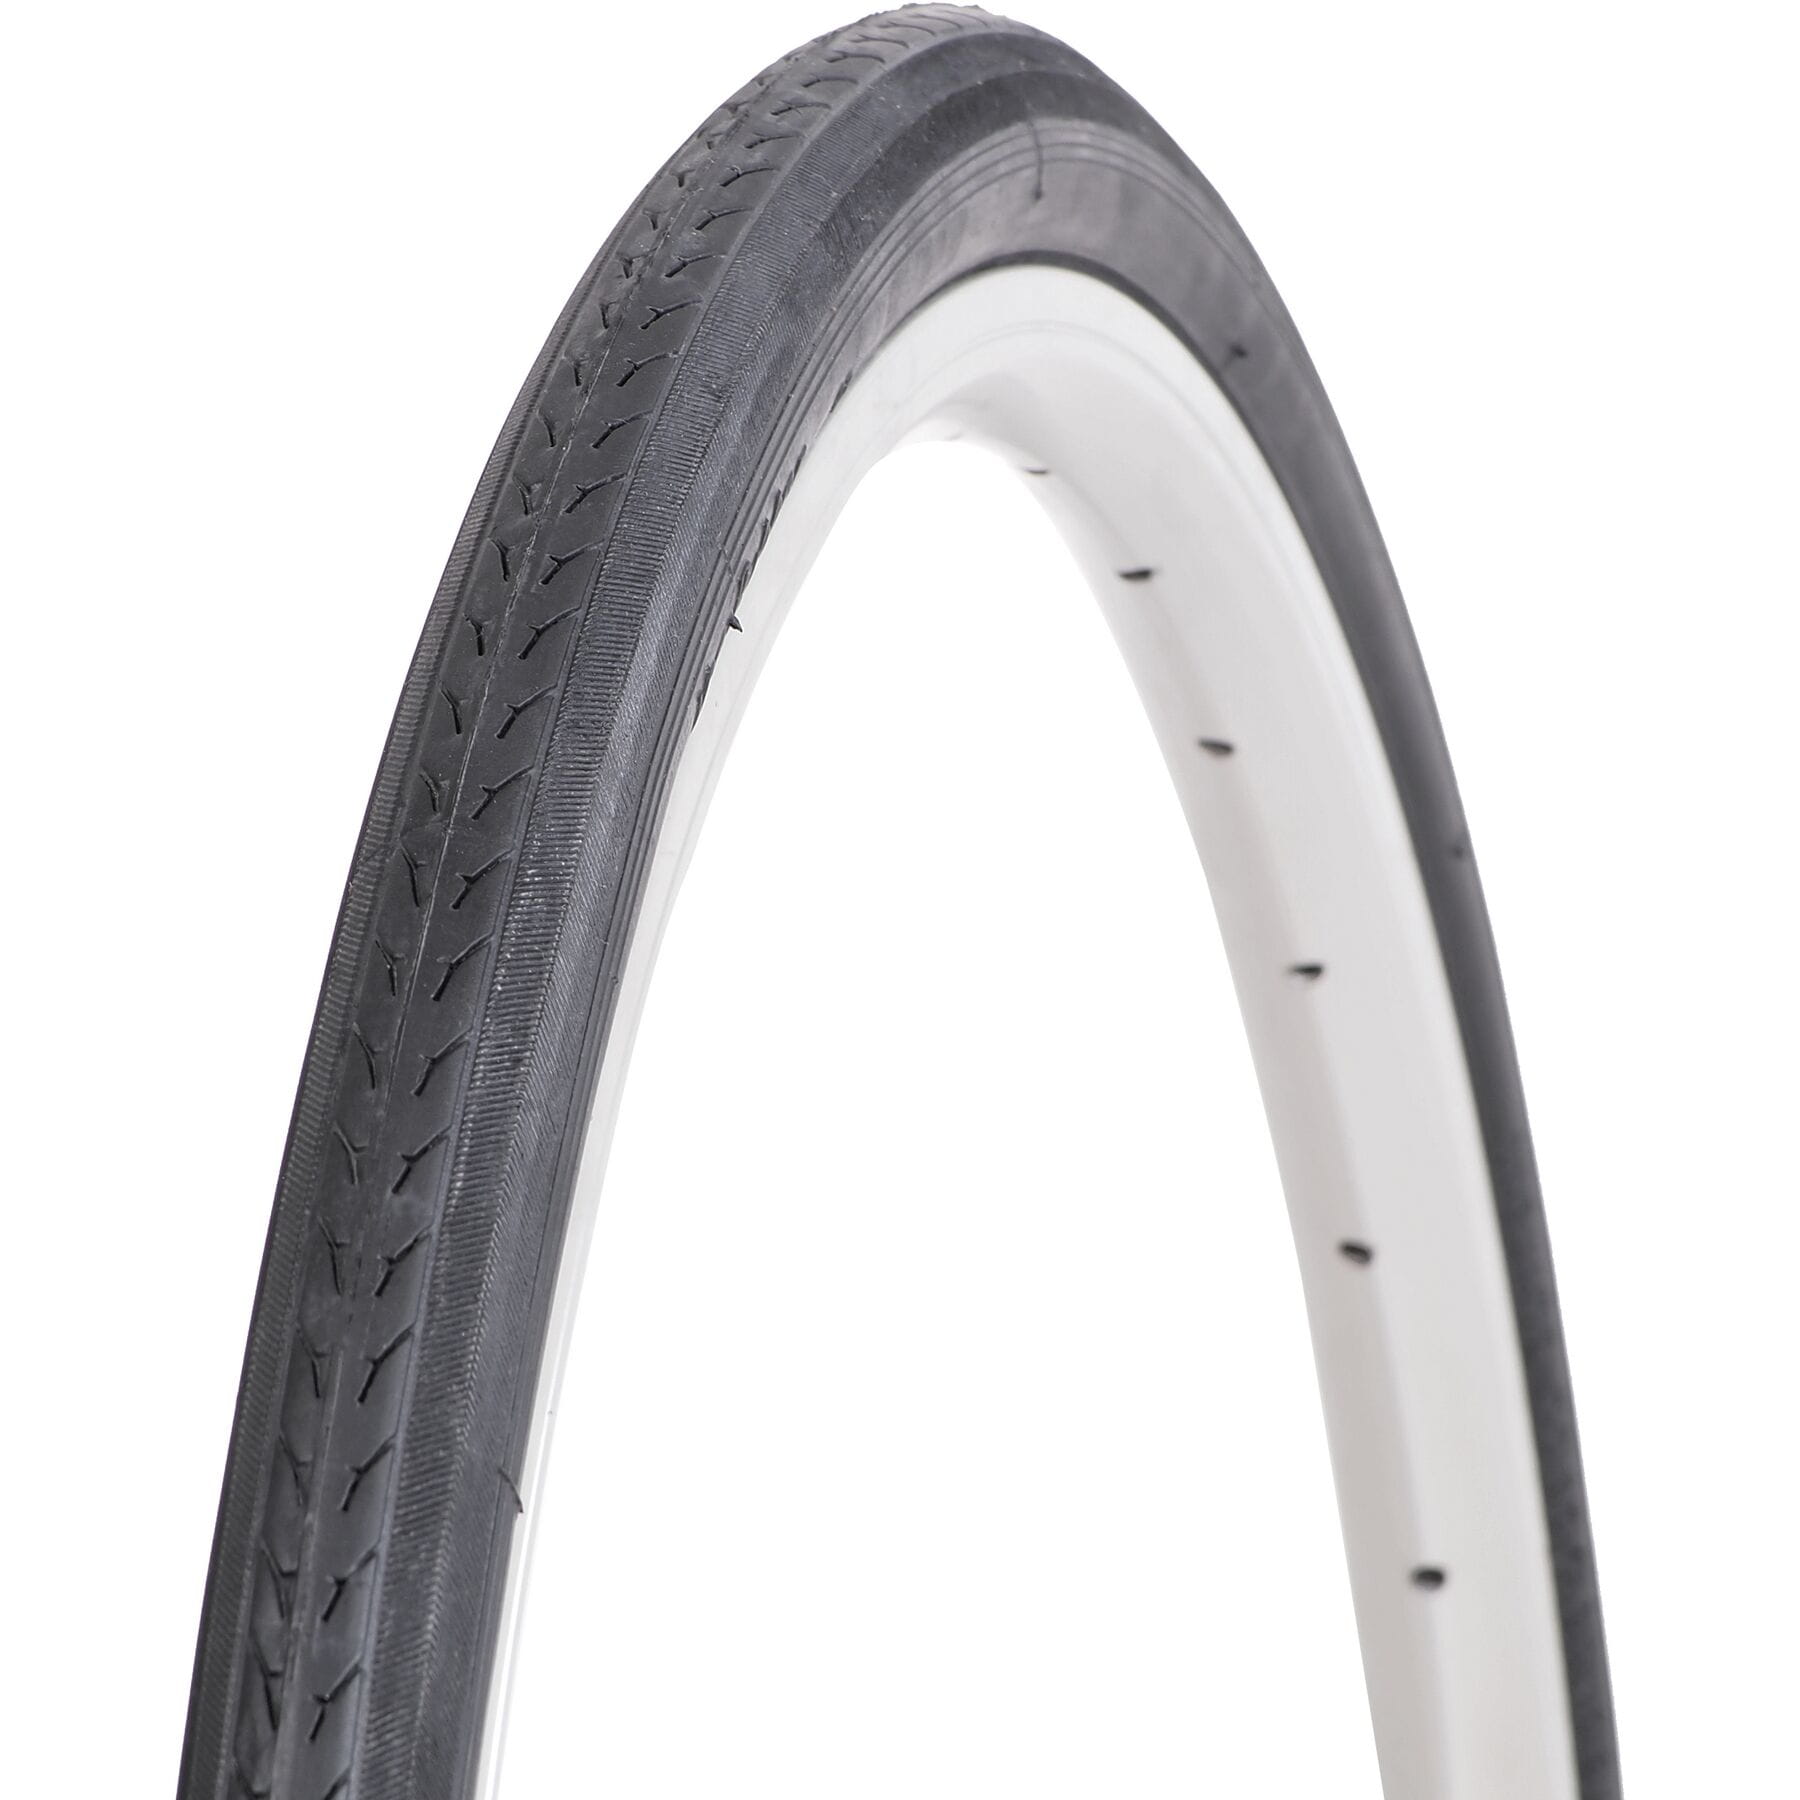 NUTRAK Imperial 26 x 1 3/8 Tyre-Bicycle Tires-NUTRAK-Chain Driven Cycles-Bike Shop-Ireland